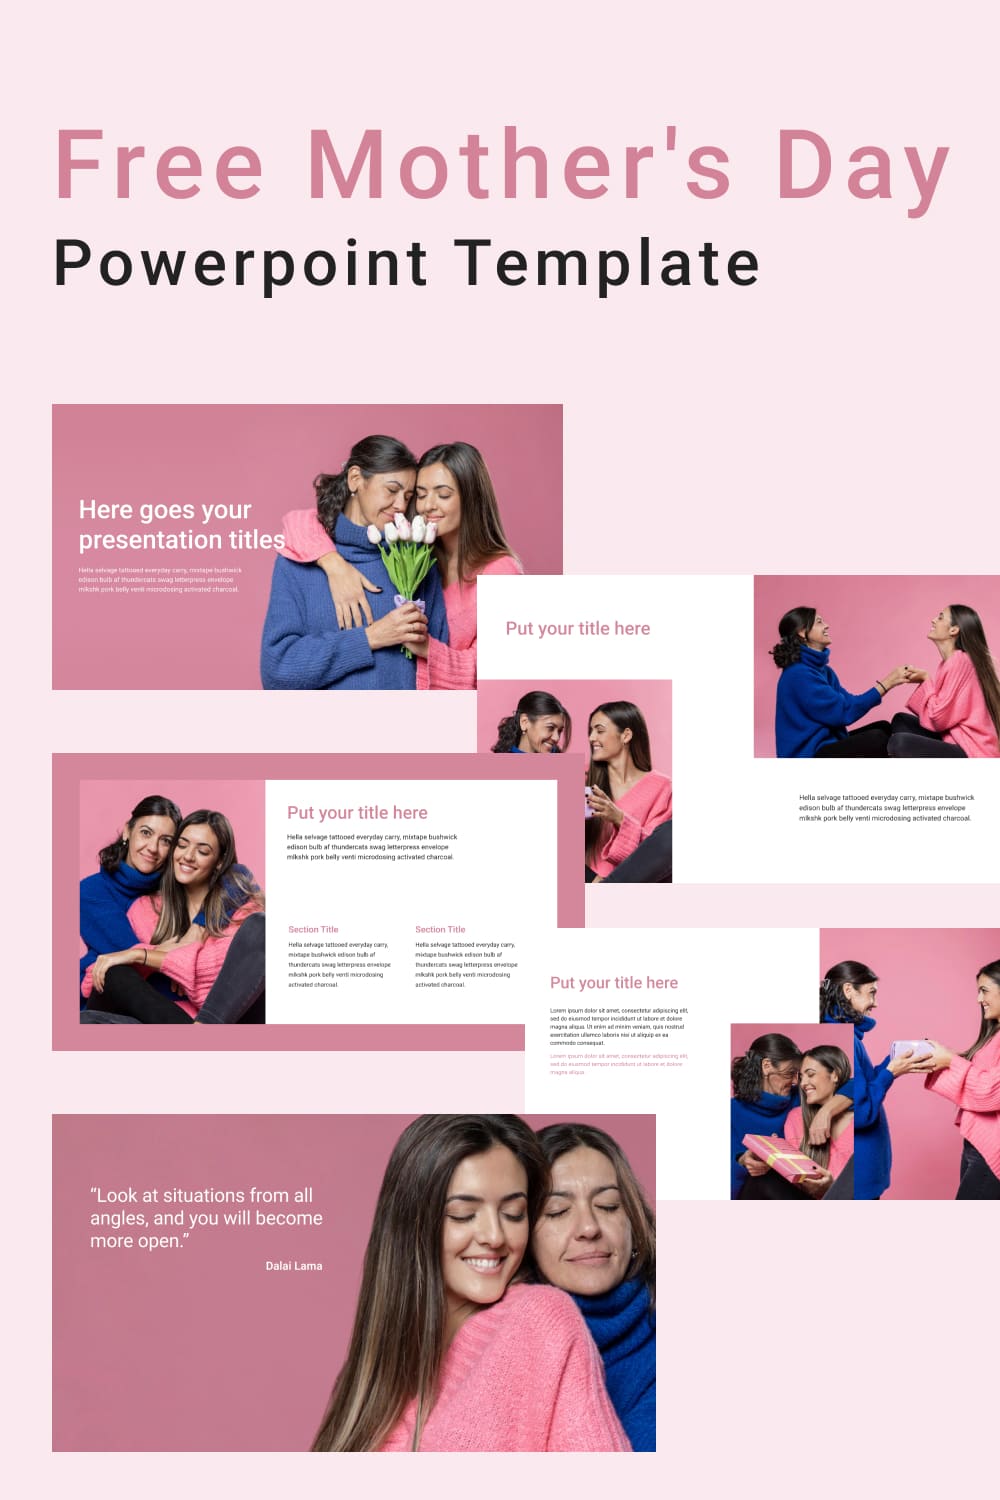 Pinterest of Mothers Day Powerpoint Template.